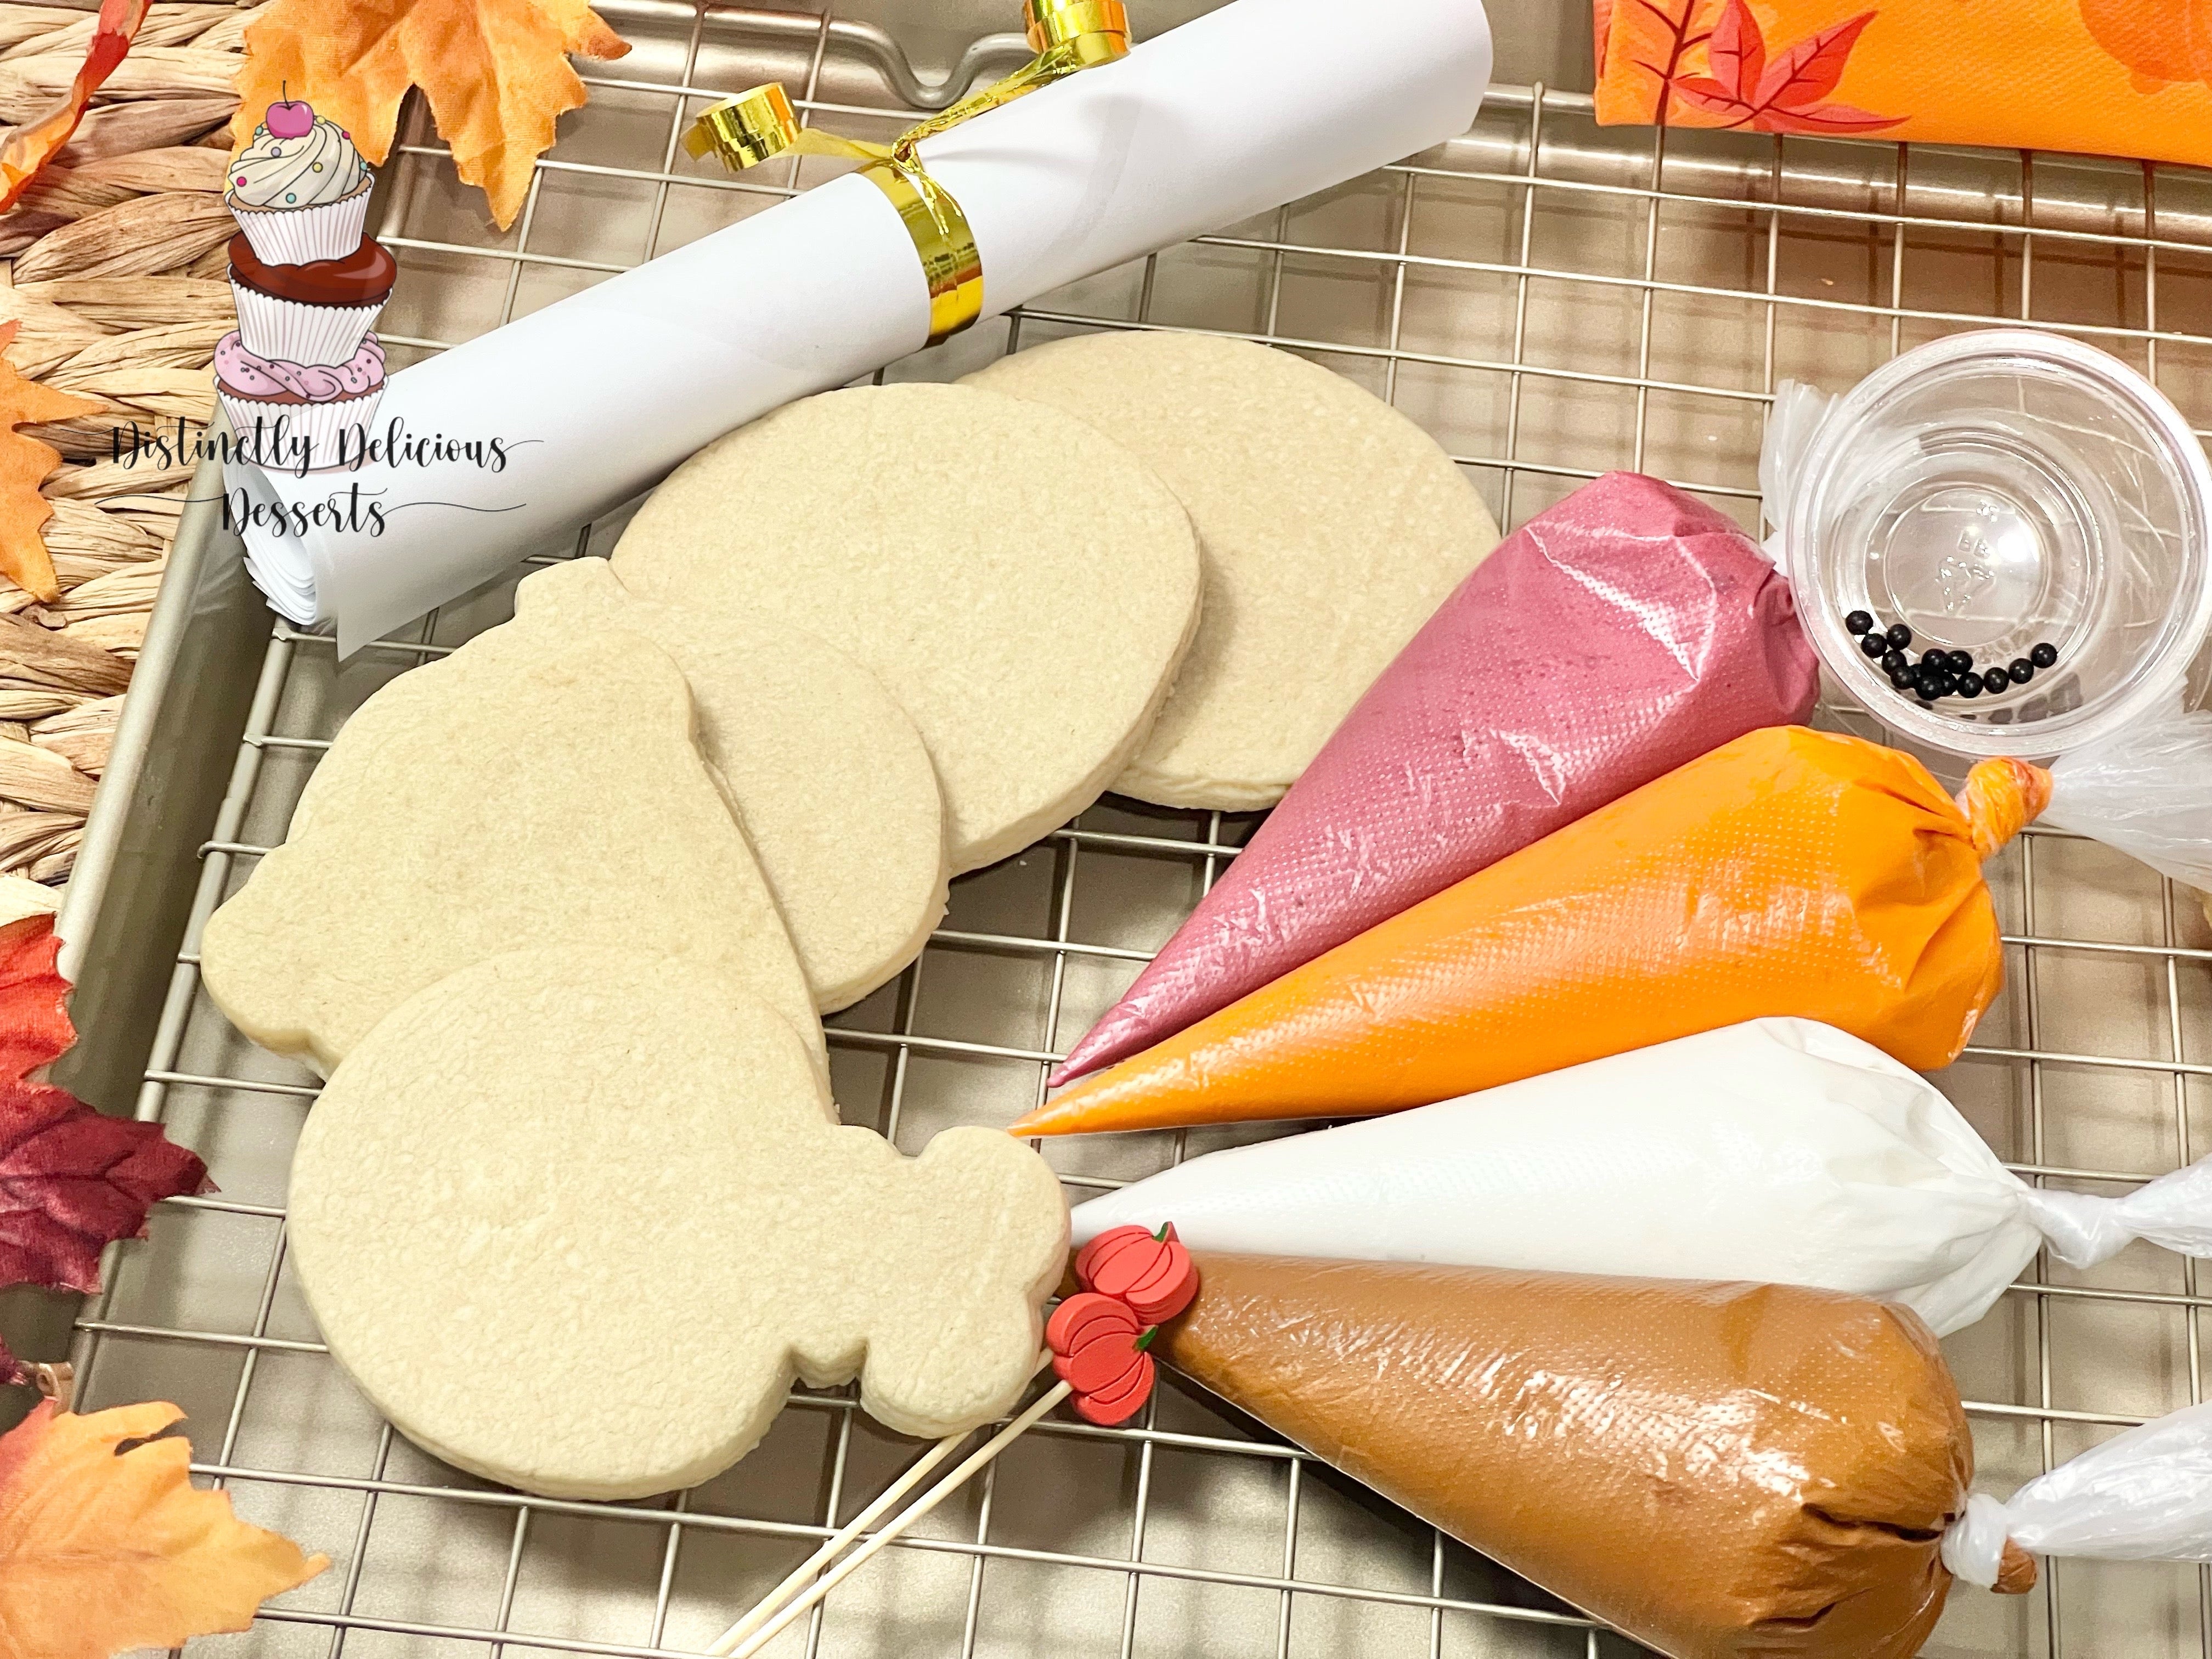 November Cookie Class DIY Kit - Available from 11/13 - 11/30